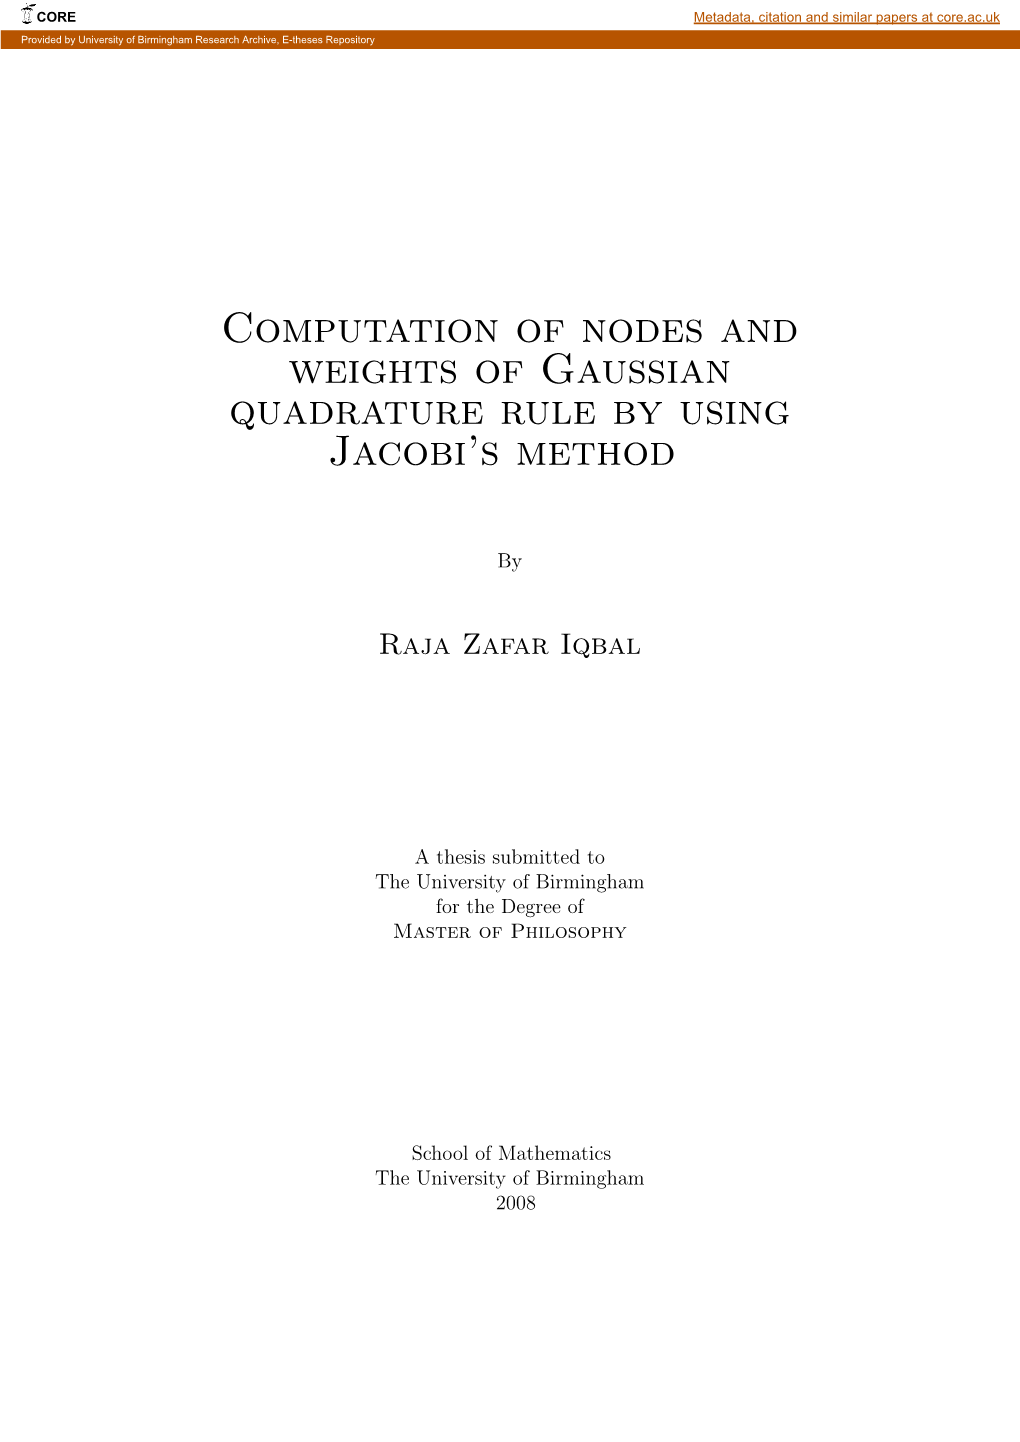 Computation of Nodes and Weights of Gaussian Quadrature Rule by Using Jacobi’S Method